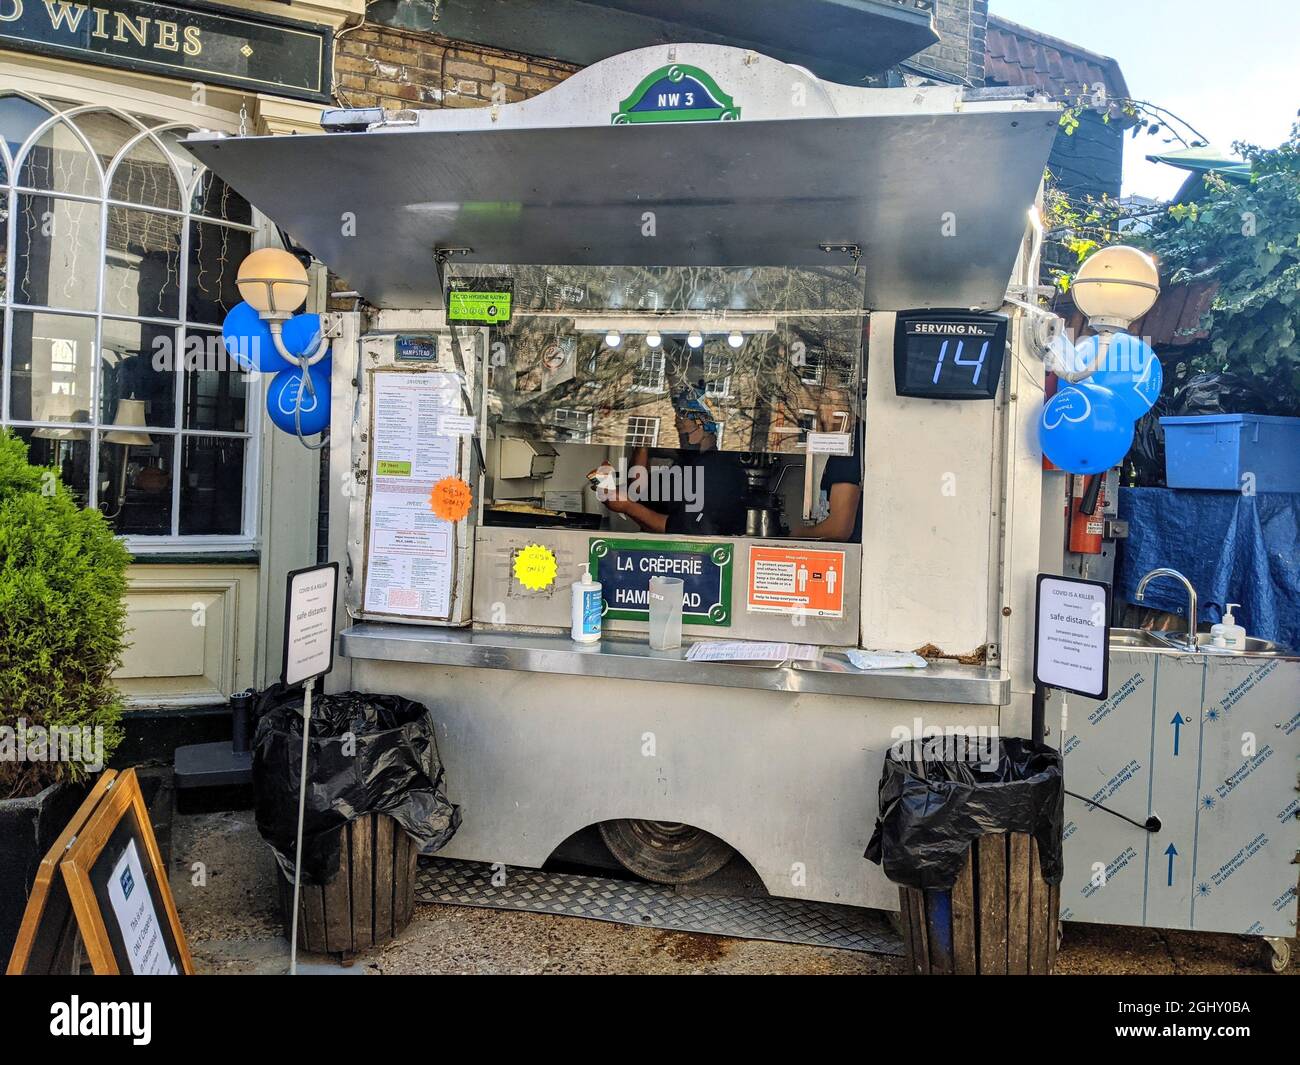 LONDON, UNITED KINGDOM - Feb 27, 2021: a crepe street food white stall with balloons and bins in front in London, united kingdom Stock Photo